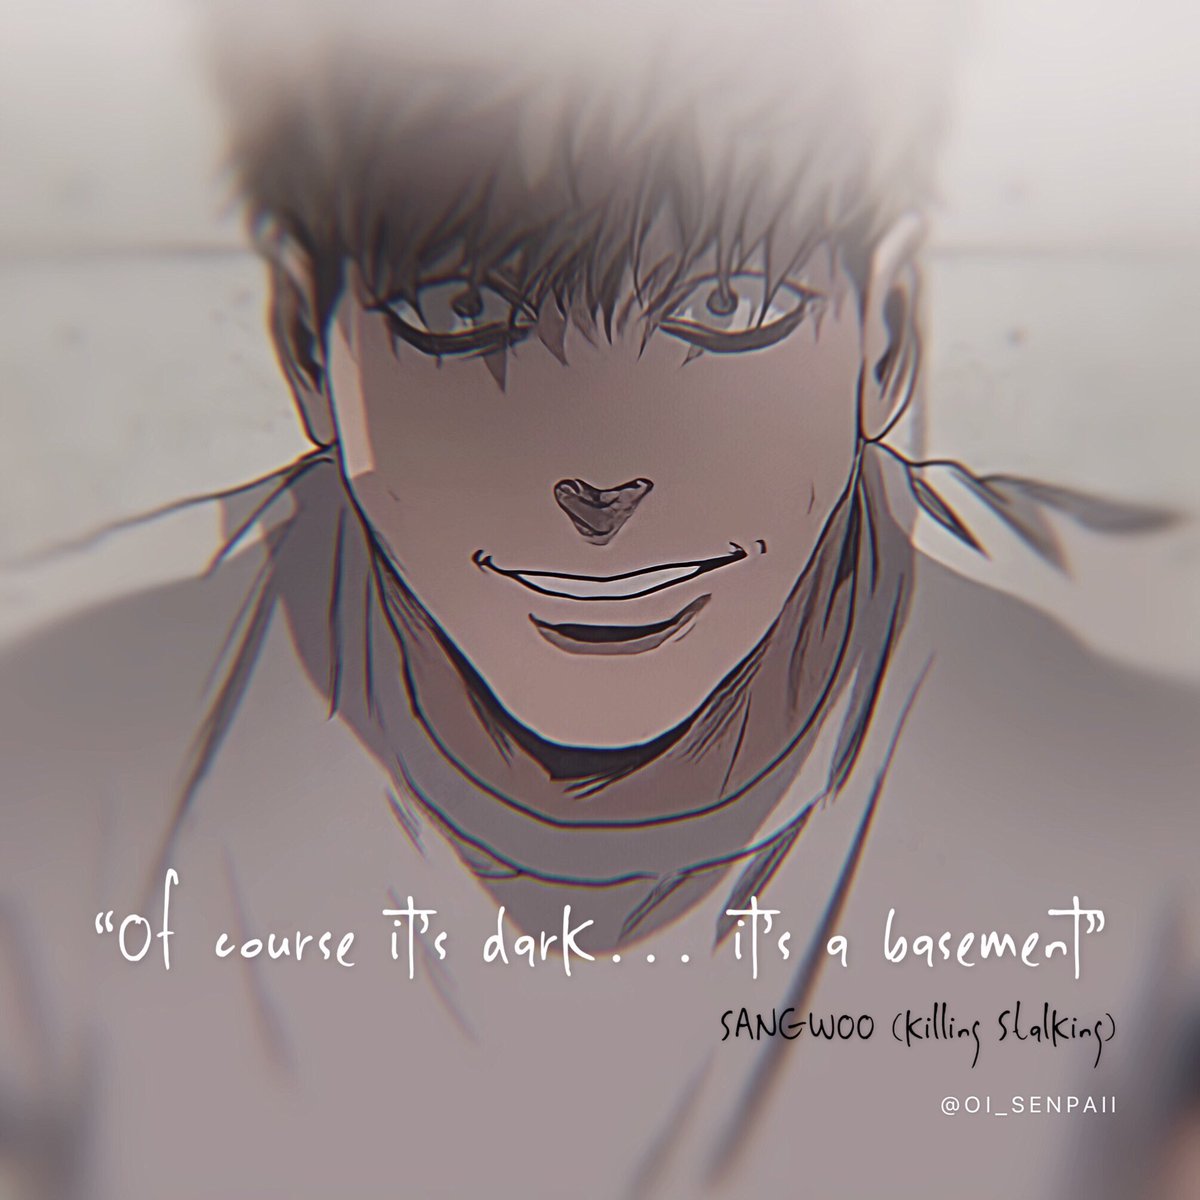 Anime Quotes and Memes - 💜Killing stalking 🔥status: ongoing 🌸summary:  Yoonbum, a scrawny quiet boy, has a crush on one of the most popular and  handsome guys in school, Sangwoo. One day,